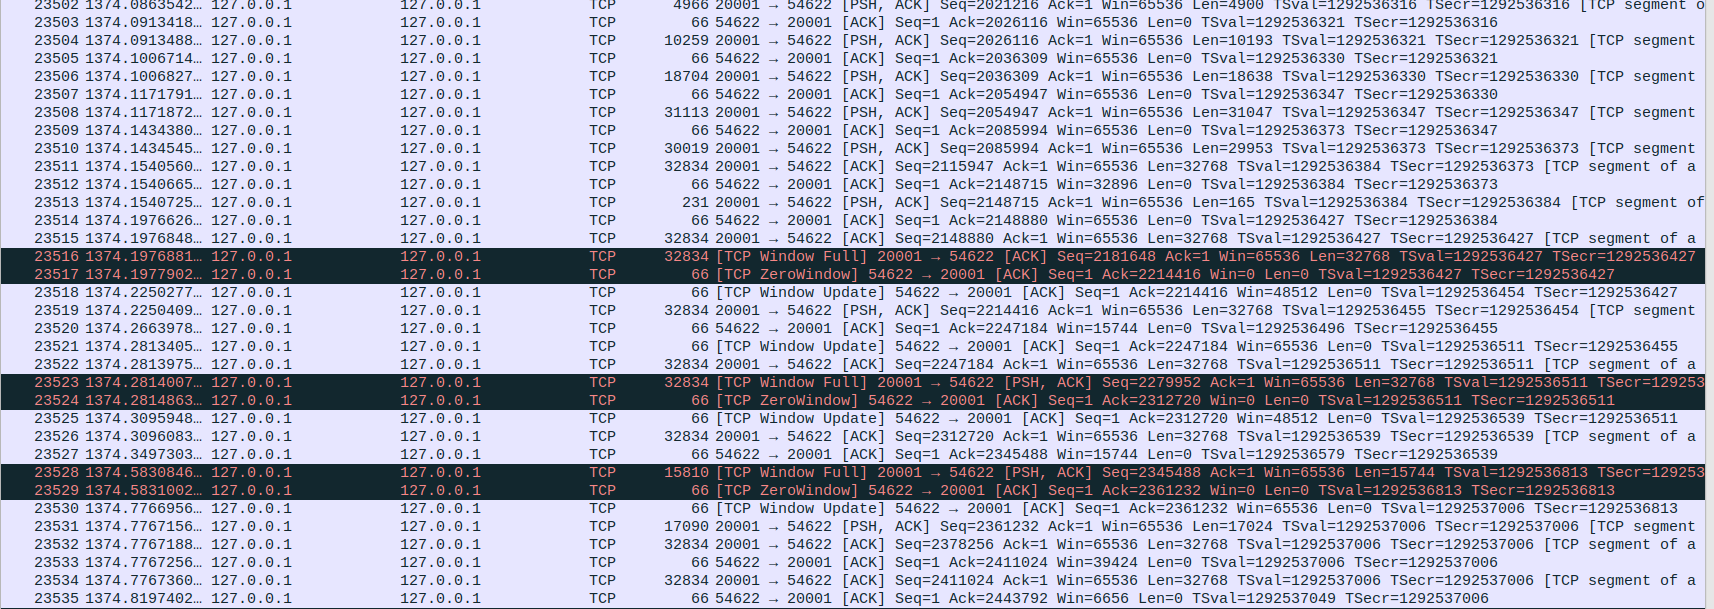 wireshark logs of TCP zero window condition being reached